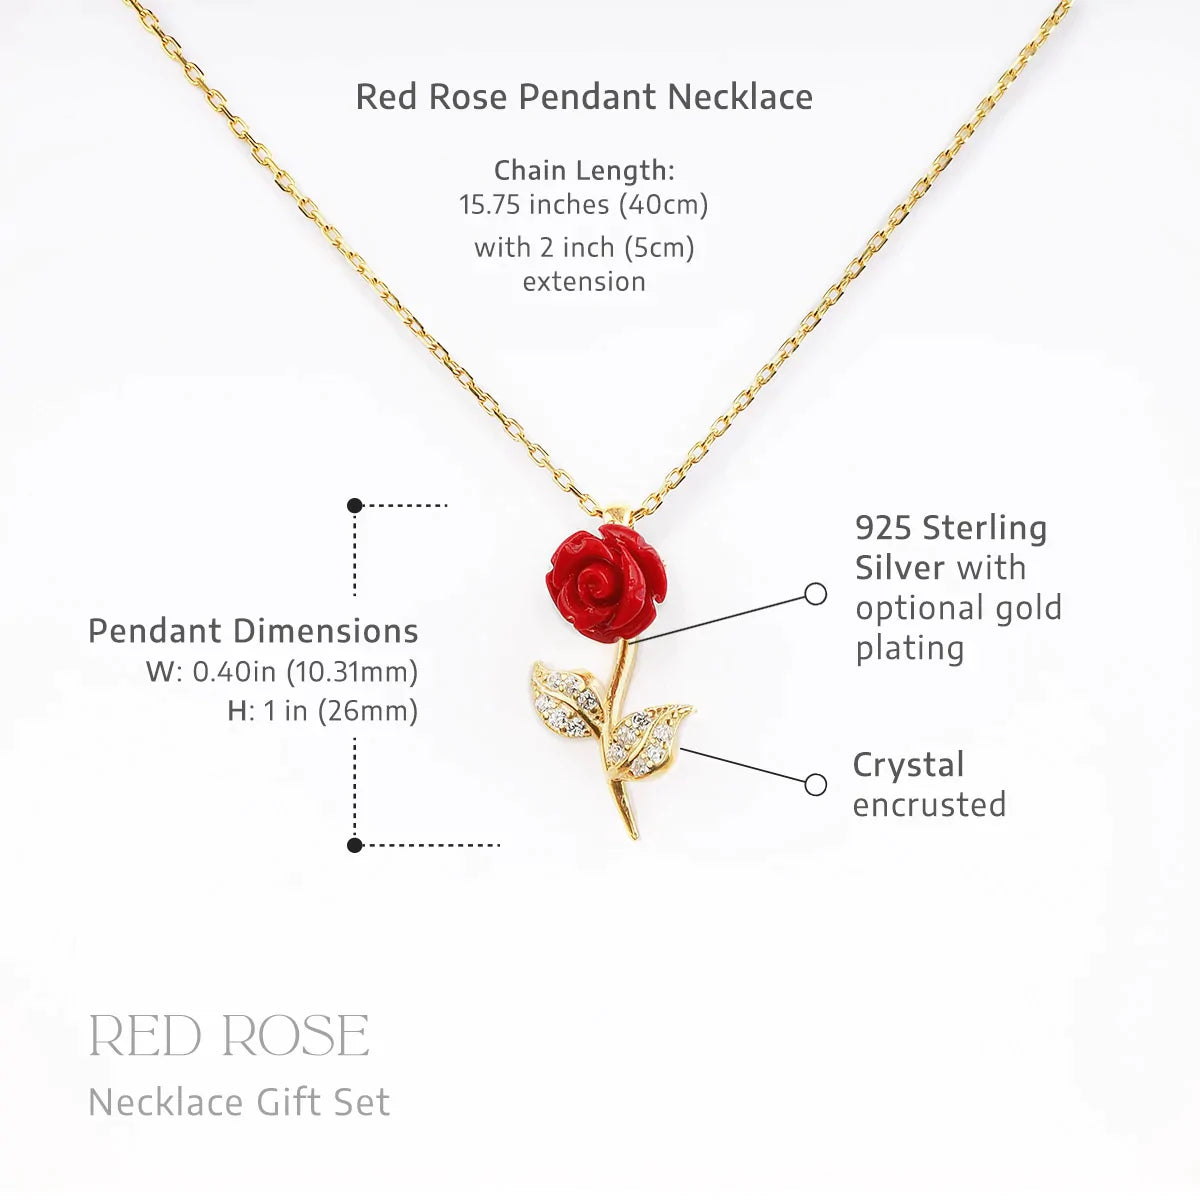 To My Sister the Beauty, From Your Brother - Red Rose Necklace Gift Set